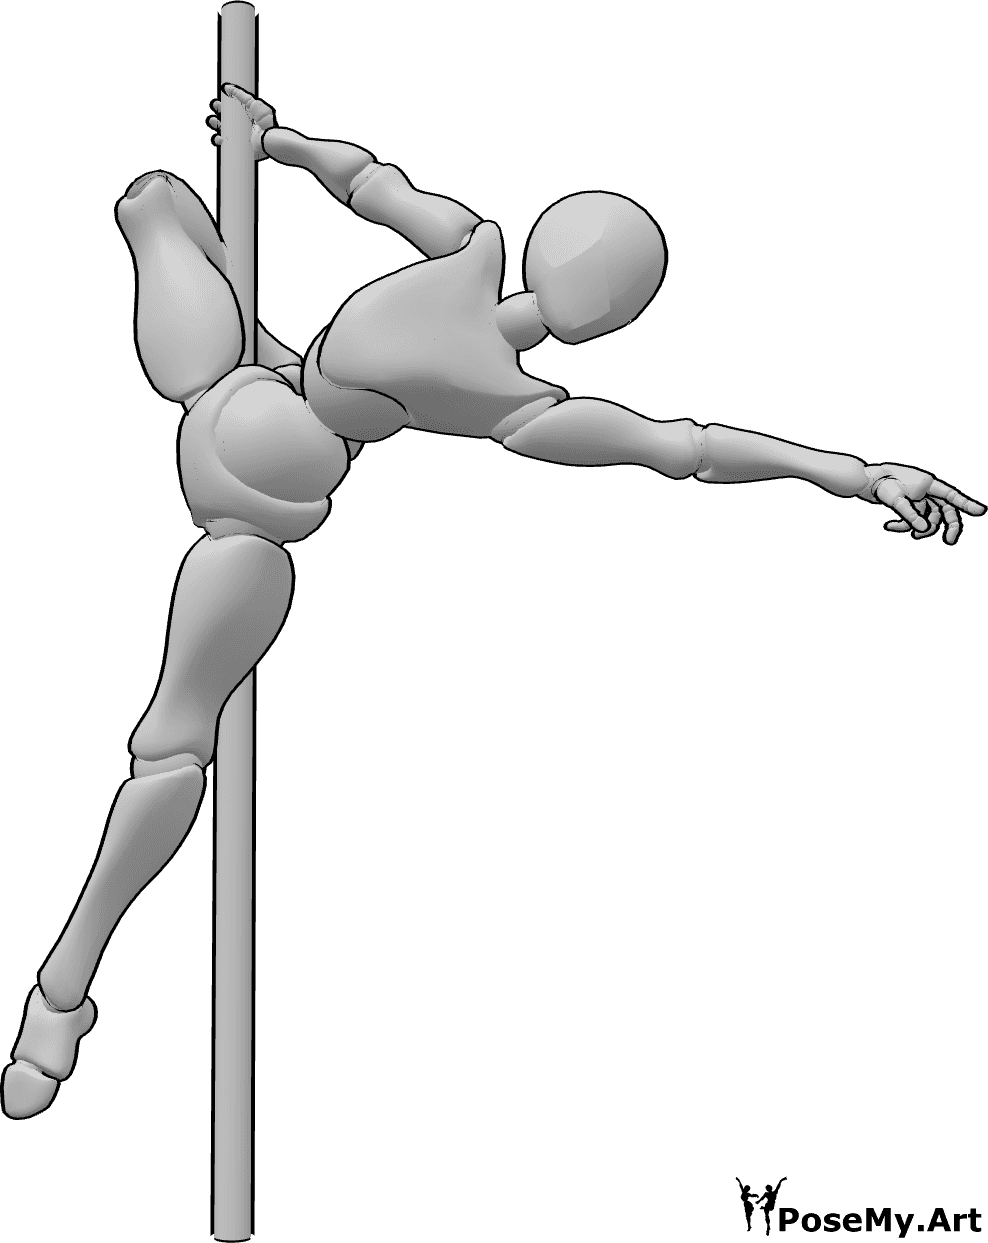 Pose Reference- Female pole dance pose - Female pole dancer is holding the pole with her right hand and right leg